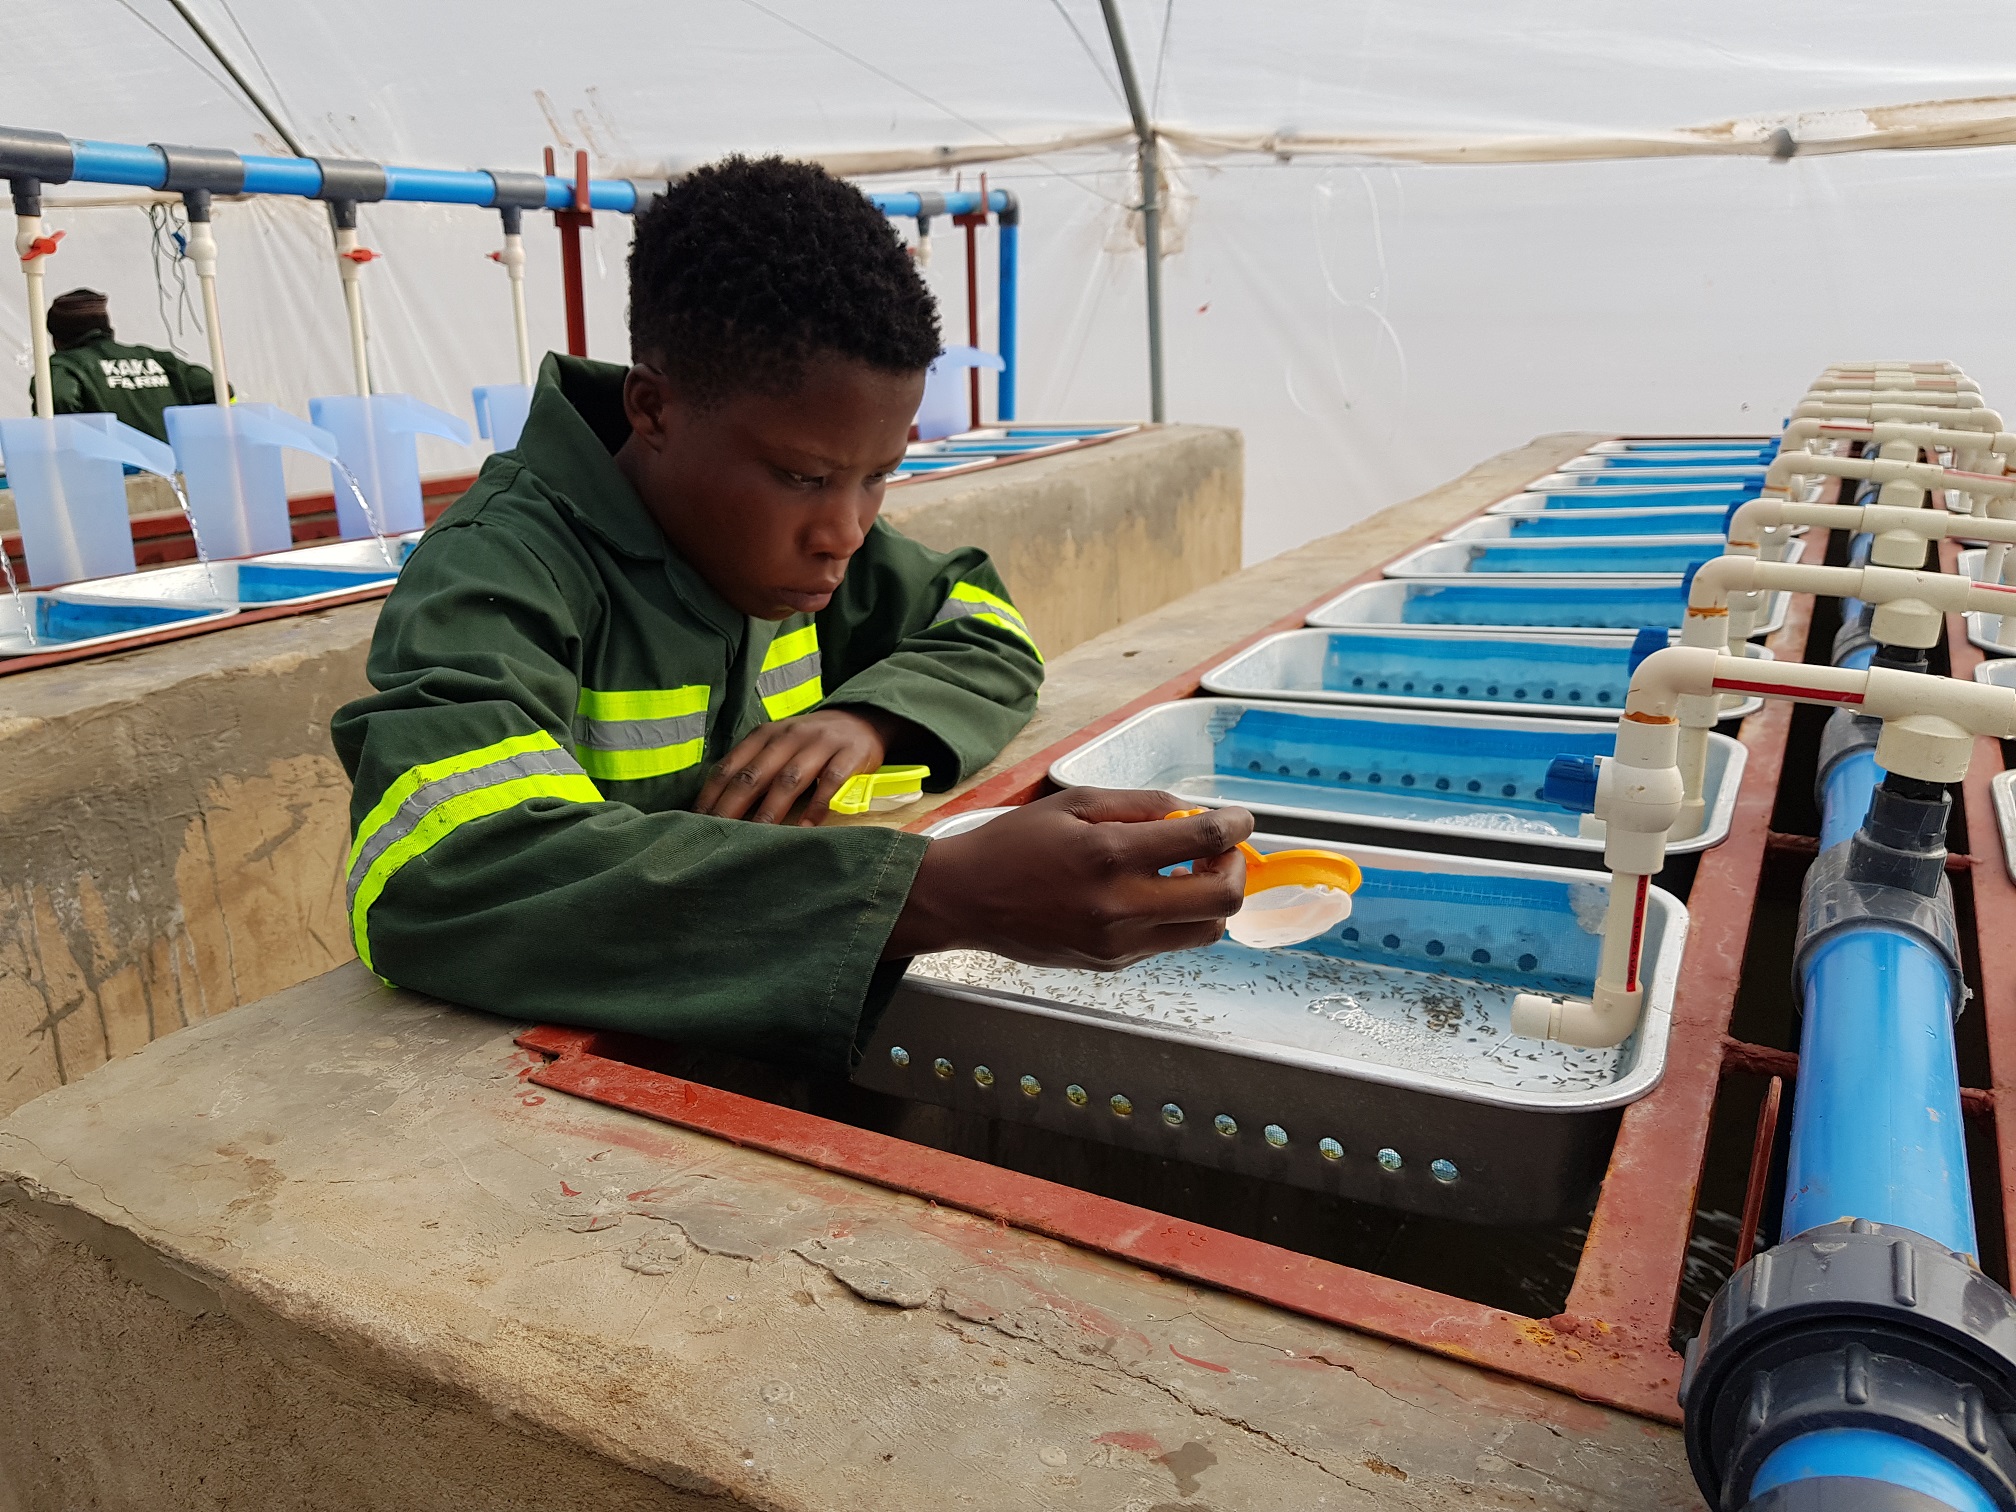 Operations at Palabana Fish Nursery & Hatchery developed under the Aquaculture Seed Fund